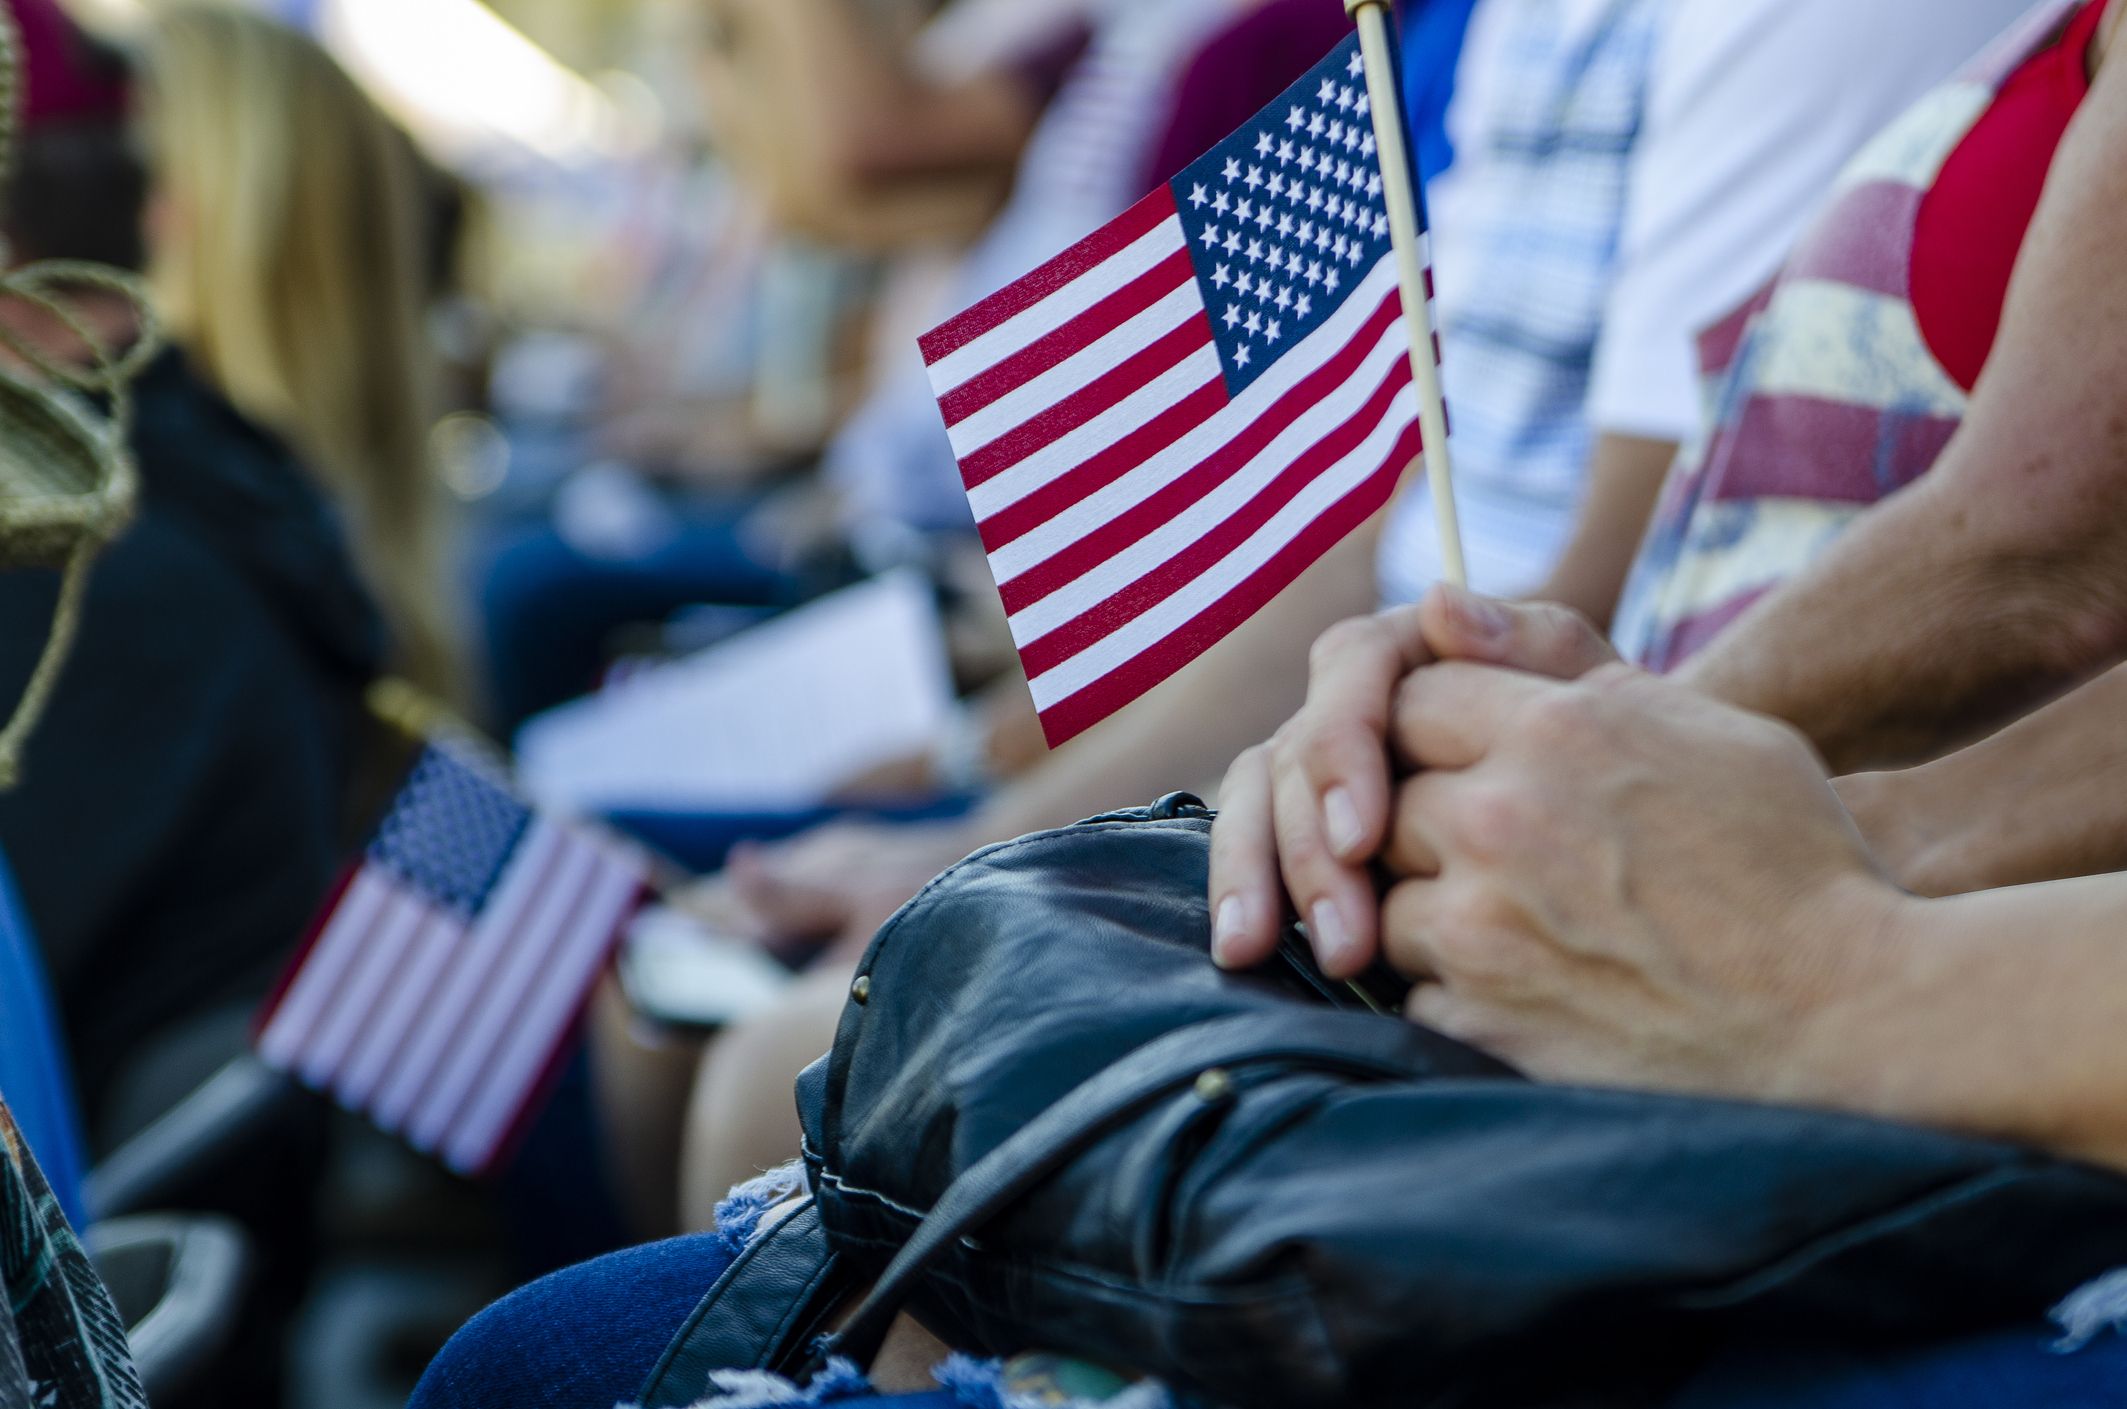 6 Memorial Day Marketing Ideas You Need to Try This Year